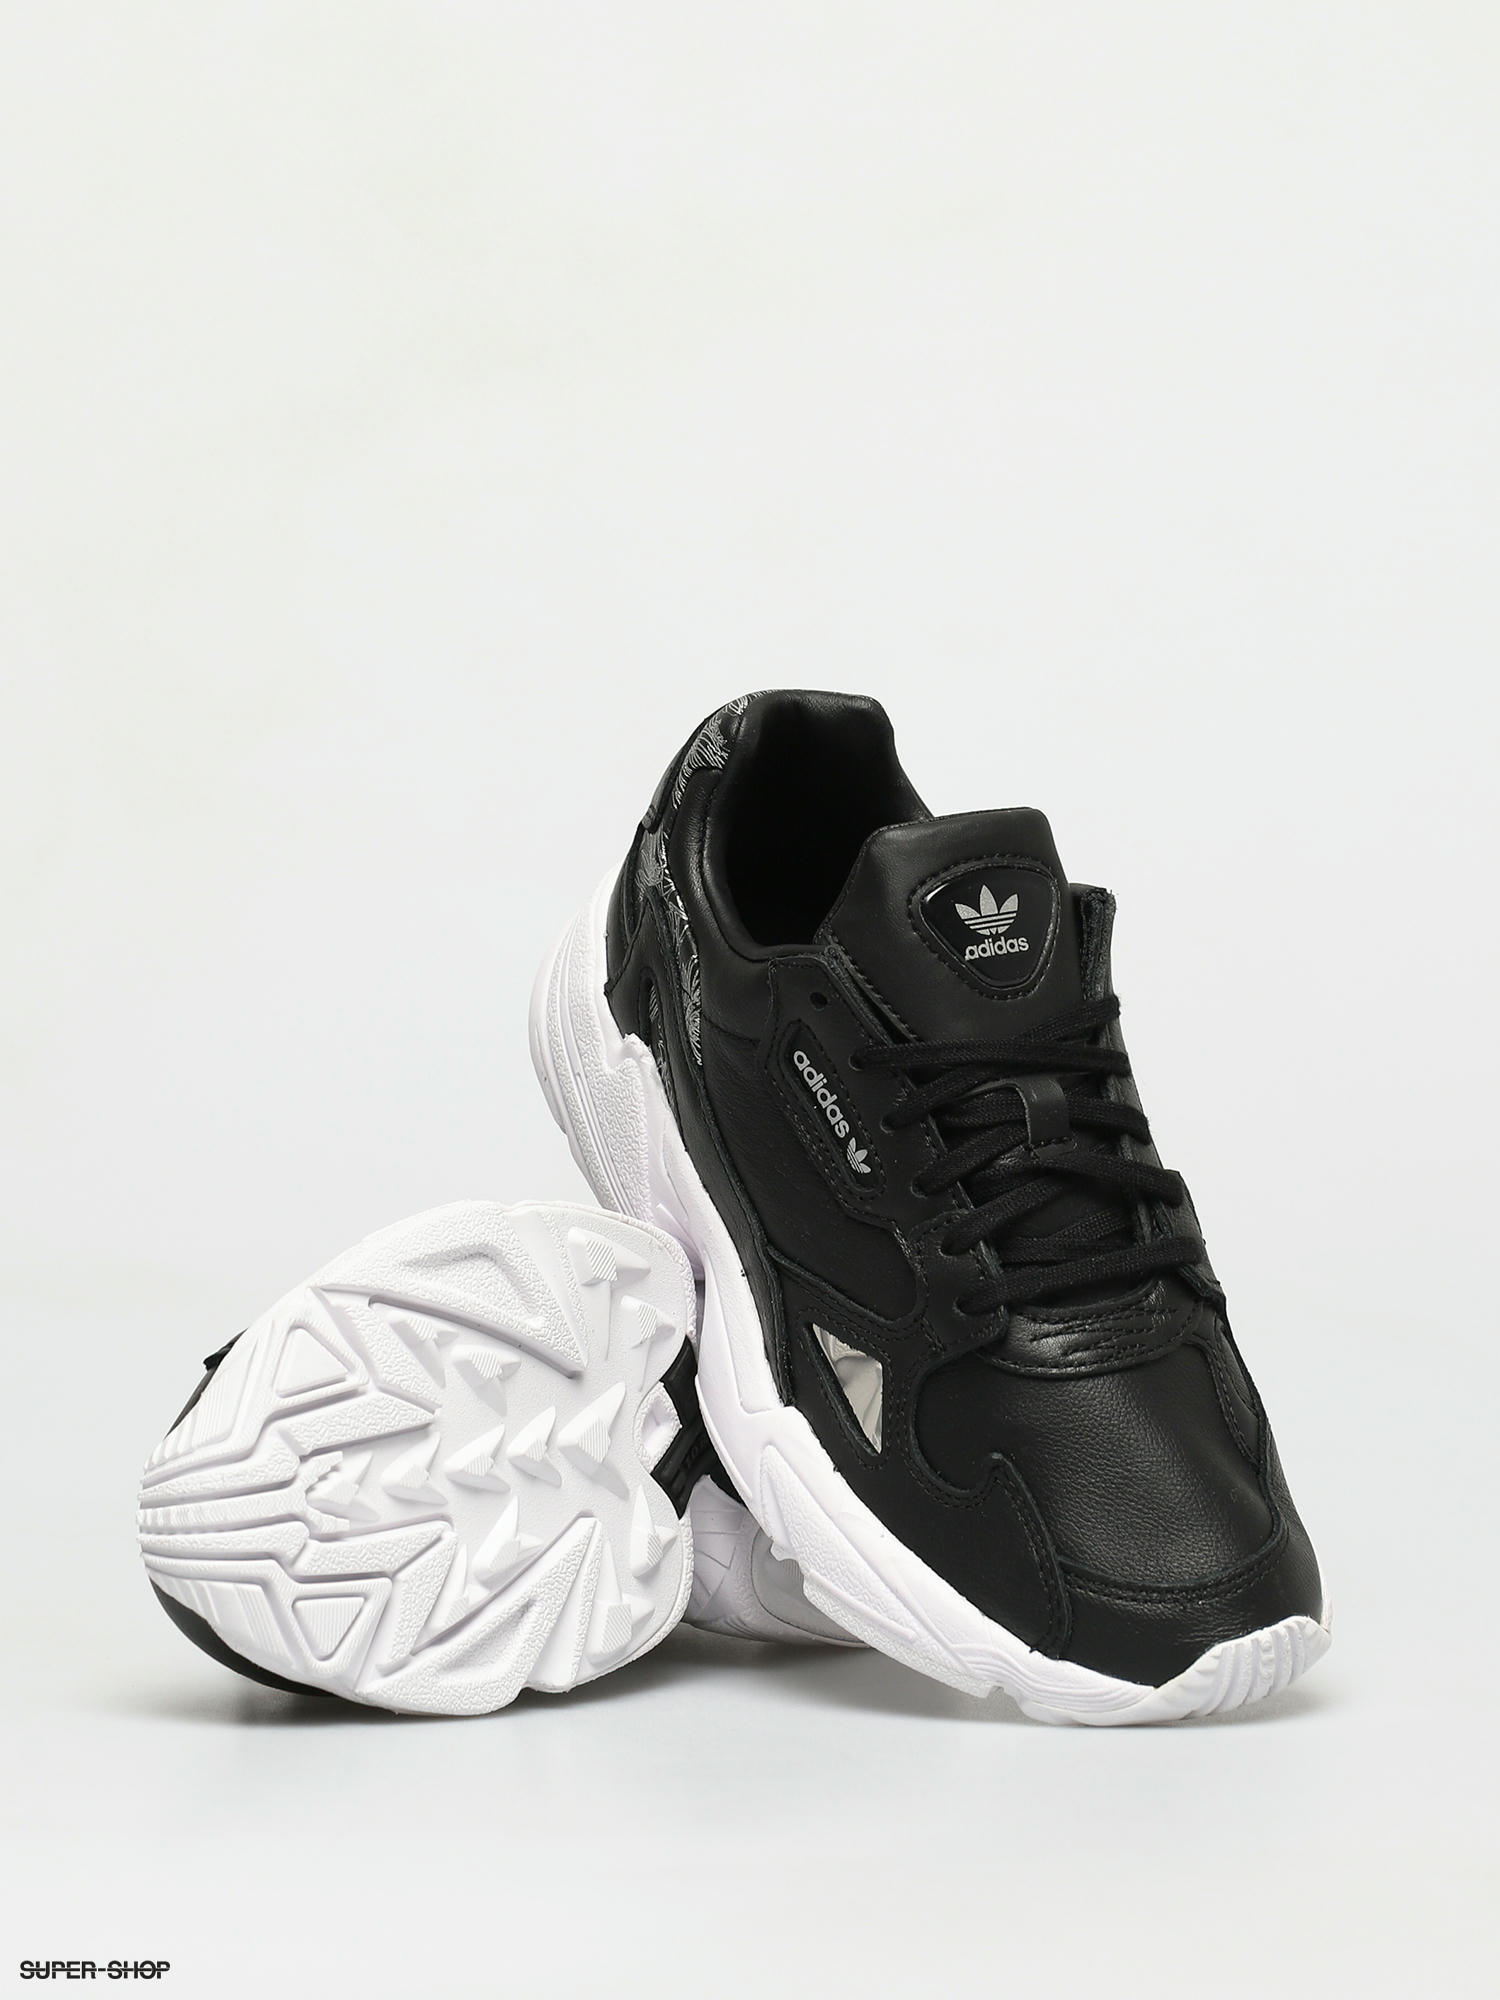 adidas black and silver shoes